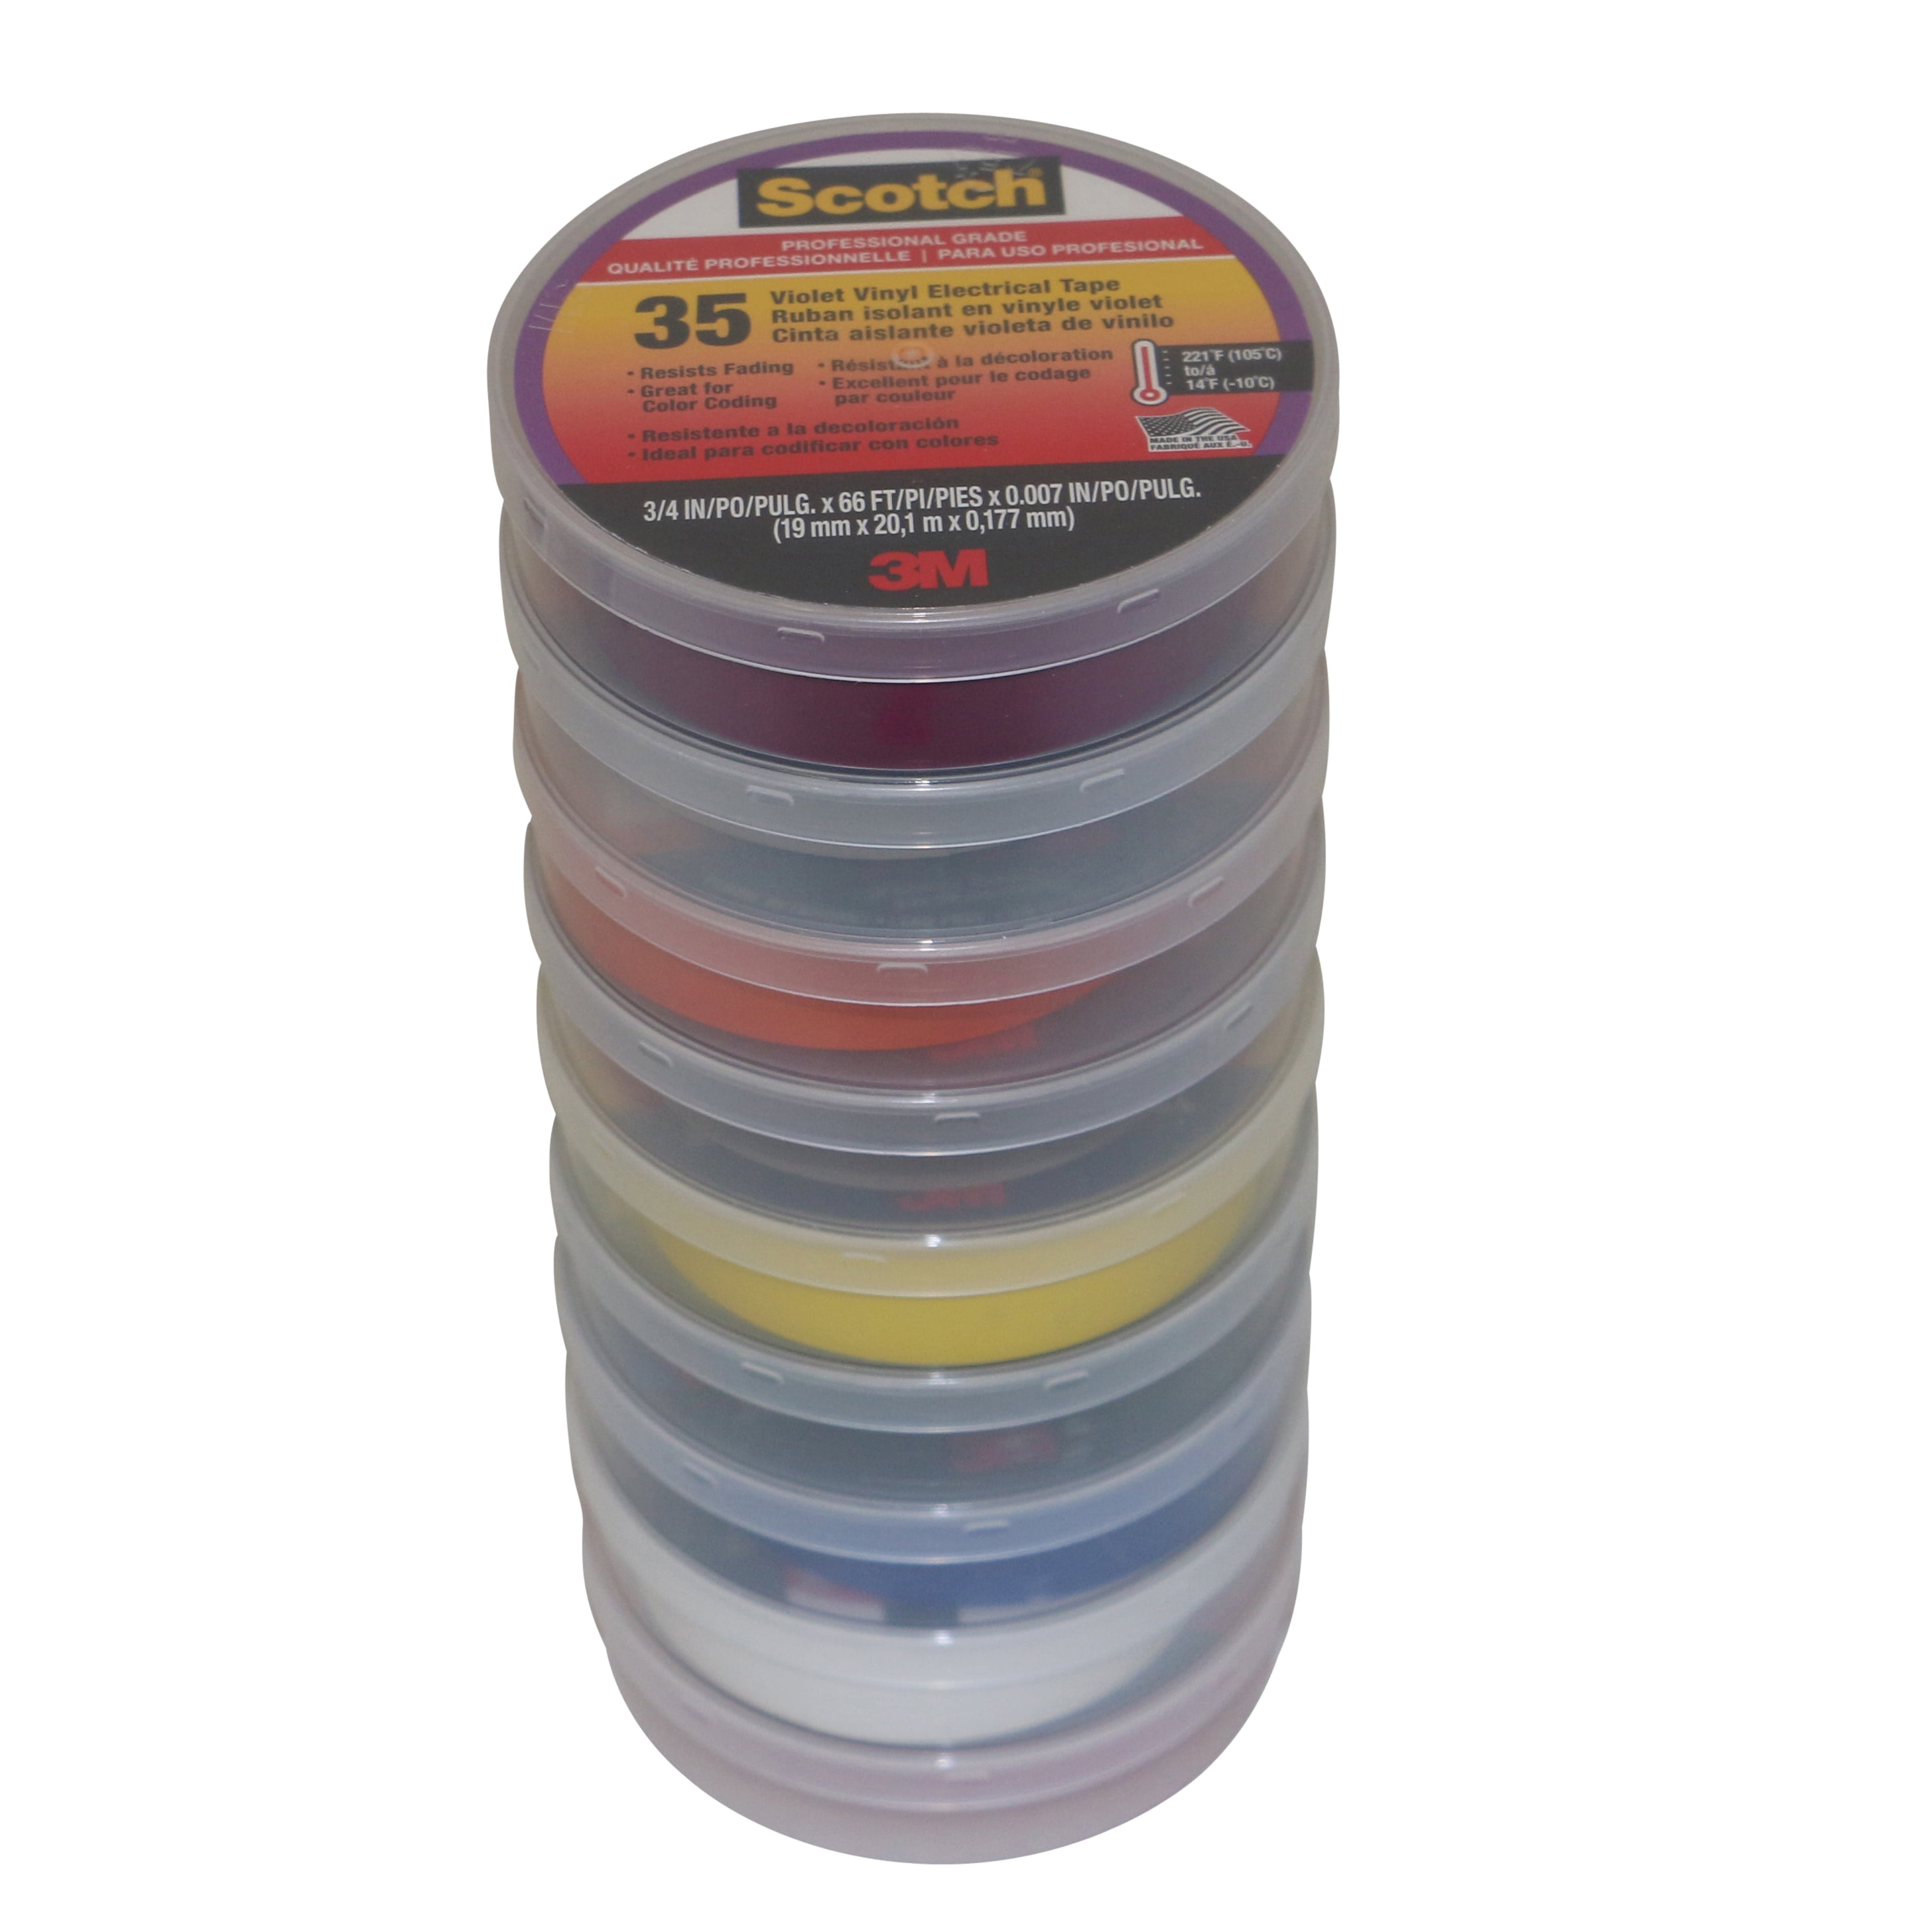 TWI 3/4 Electrical Tape Assorted Colors (5 Pack) - TW-5TAPE